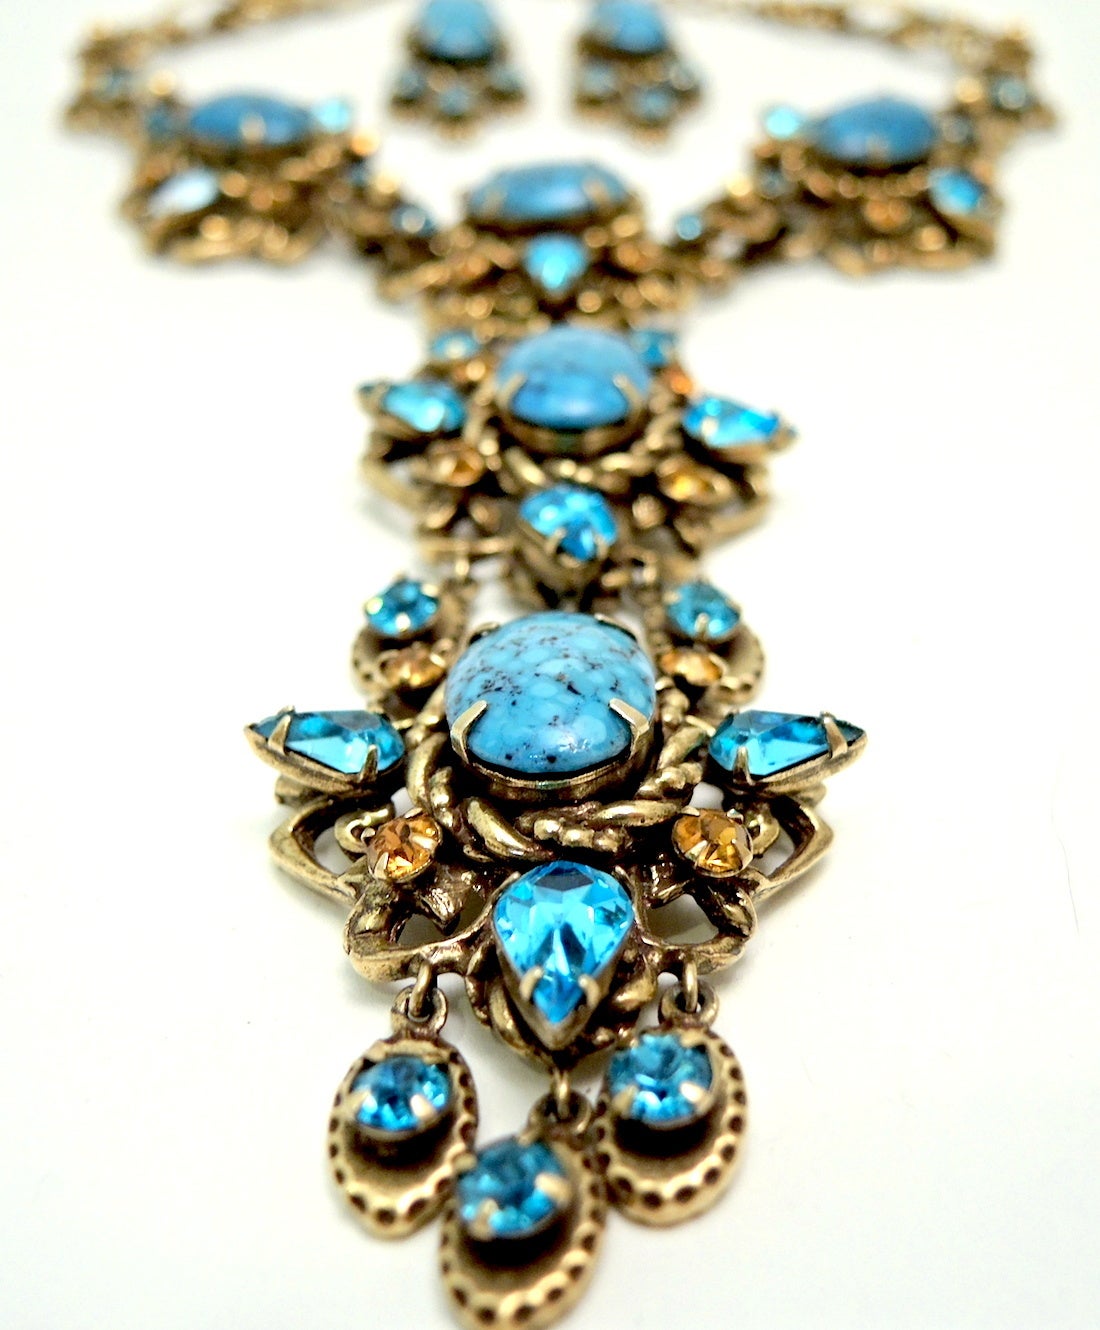 This vintage signed Christian Dior by Kramer necklace features faux turquoise stones with blue and citrine color rhinestones in a gold-tone setting.  This necklace measures 16” with a hook closure; the front drop is 5 ½” x 1 ½”.  The pierced